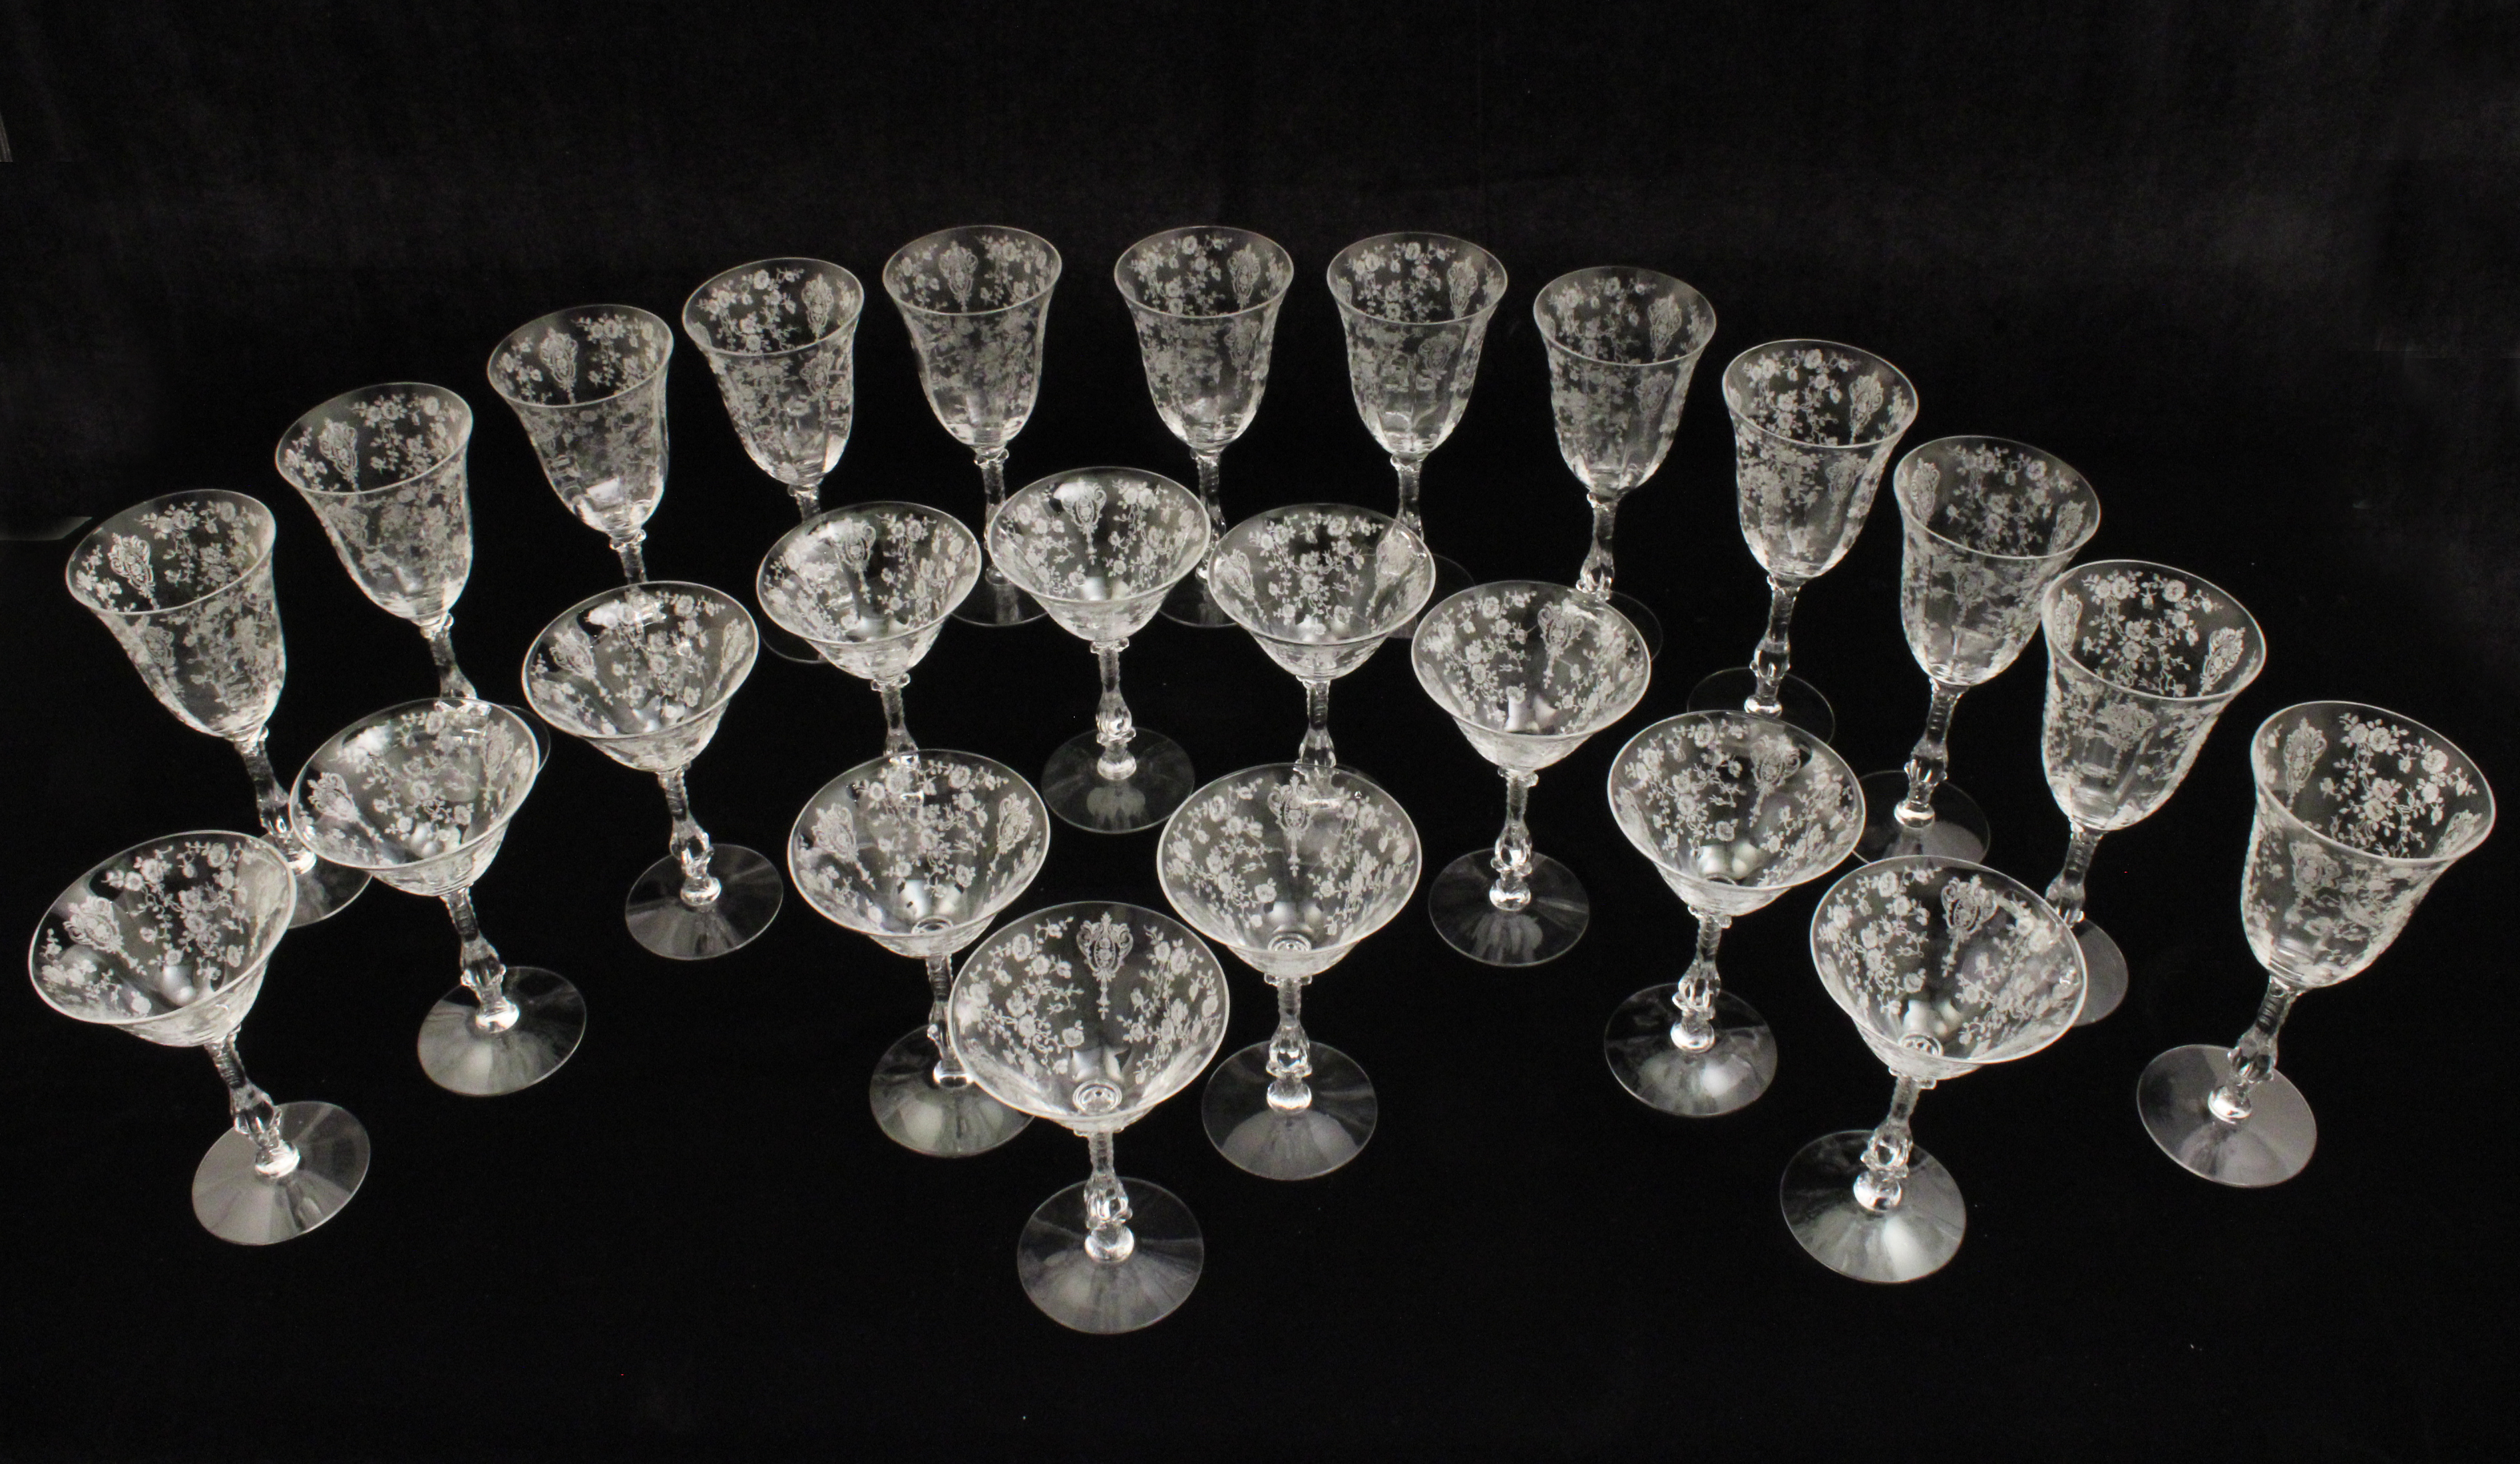 24 PIECES OF CRYSTAL STEMWARE 24 35eb6d